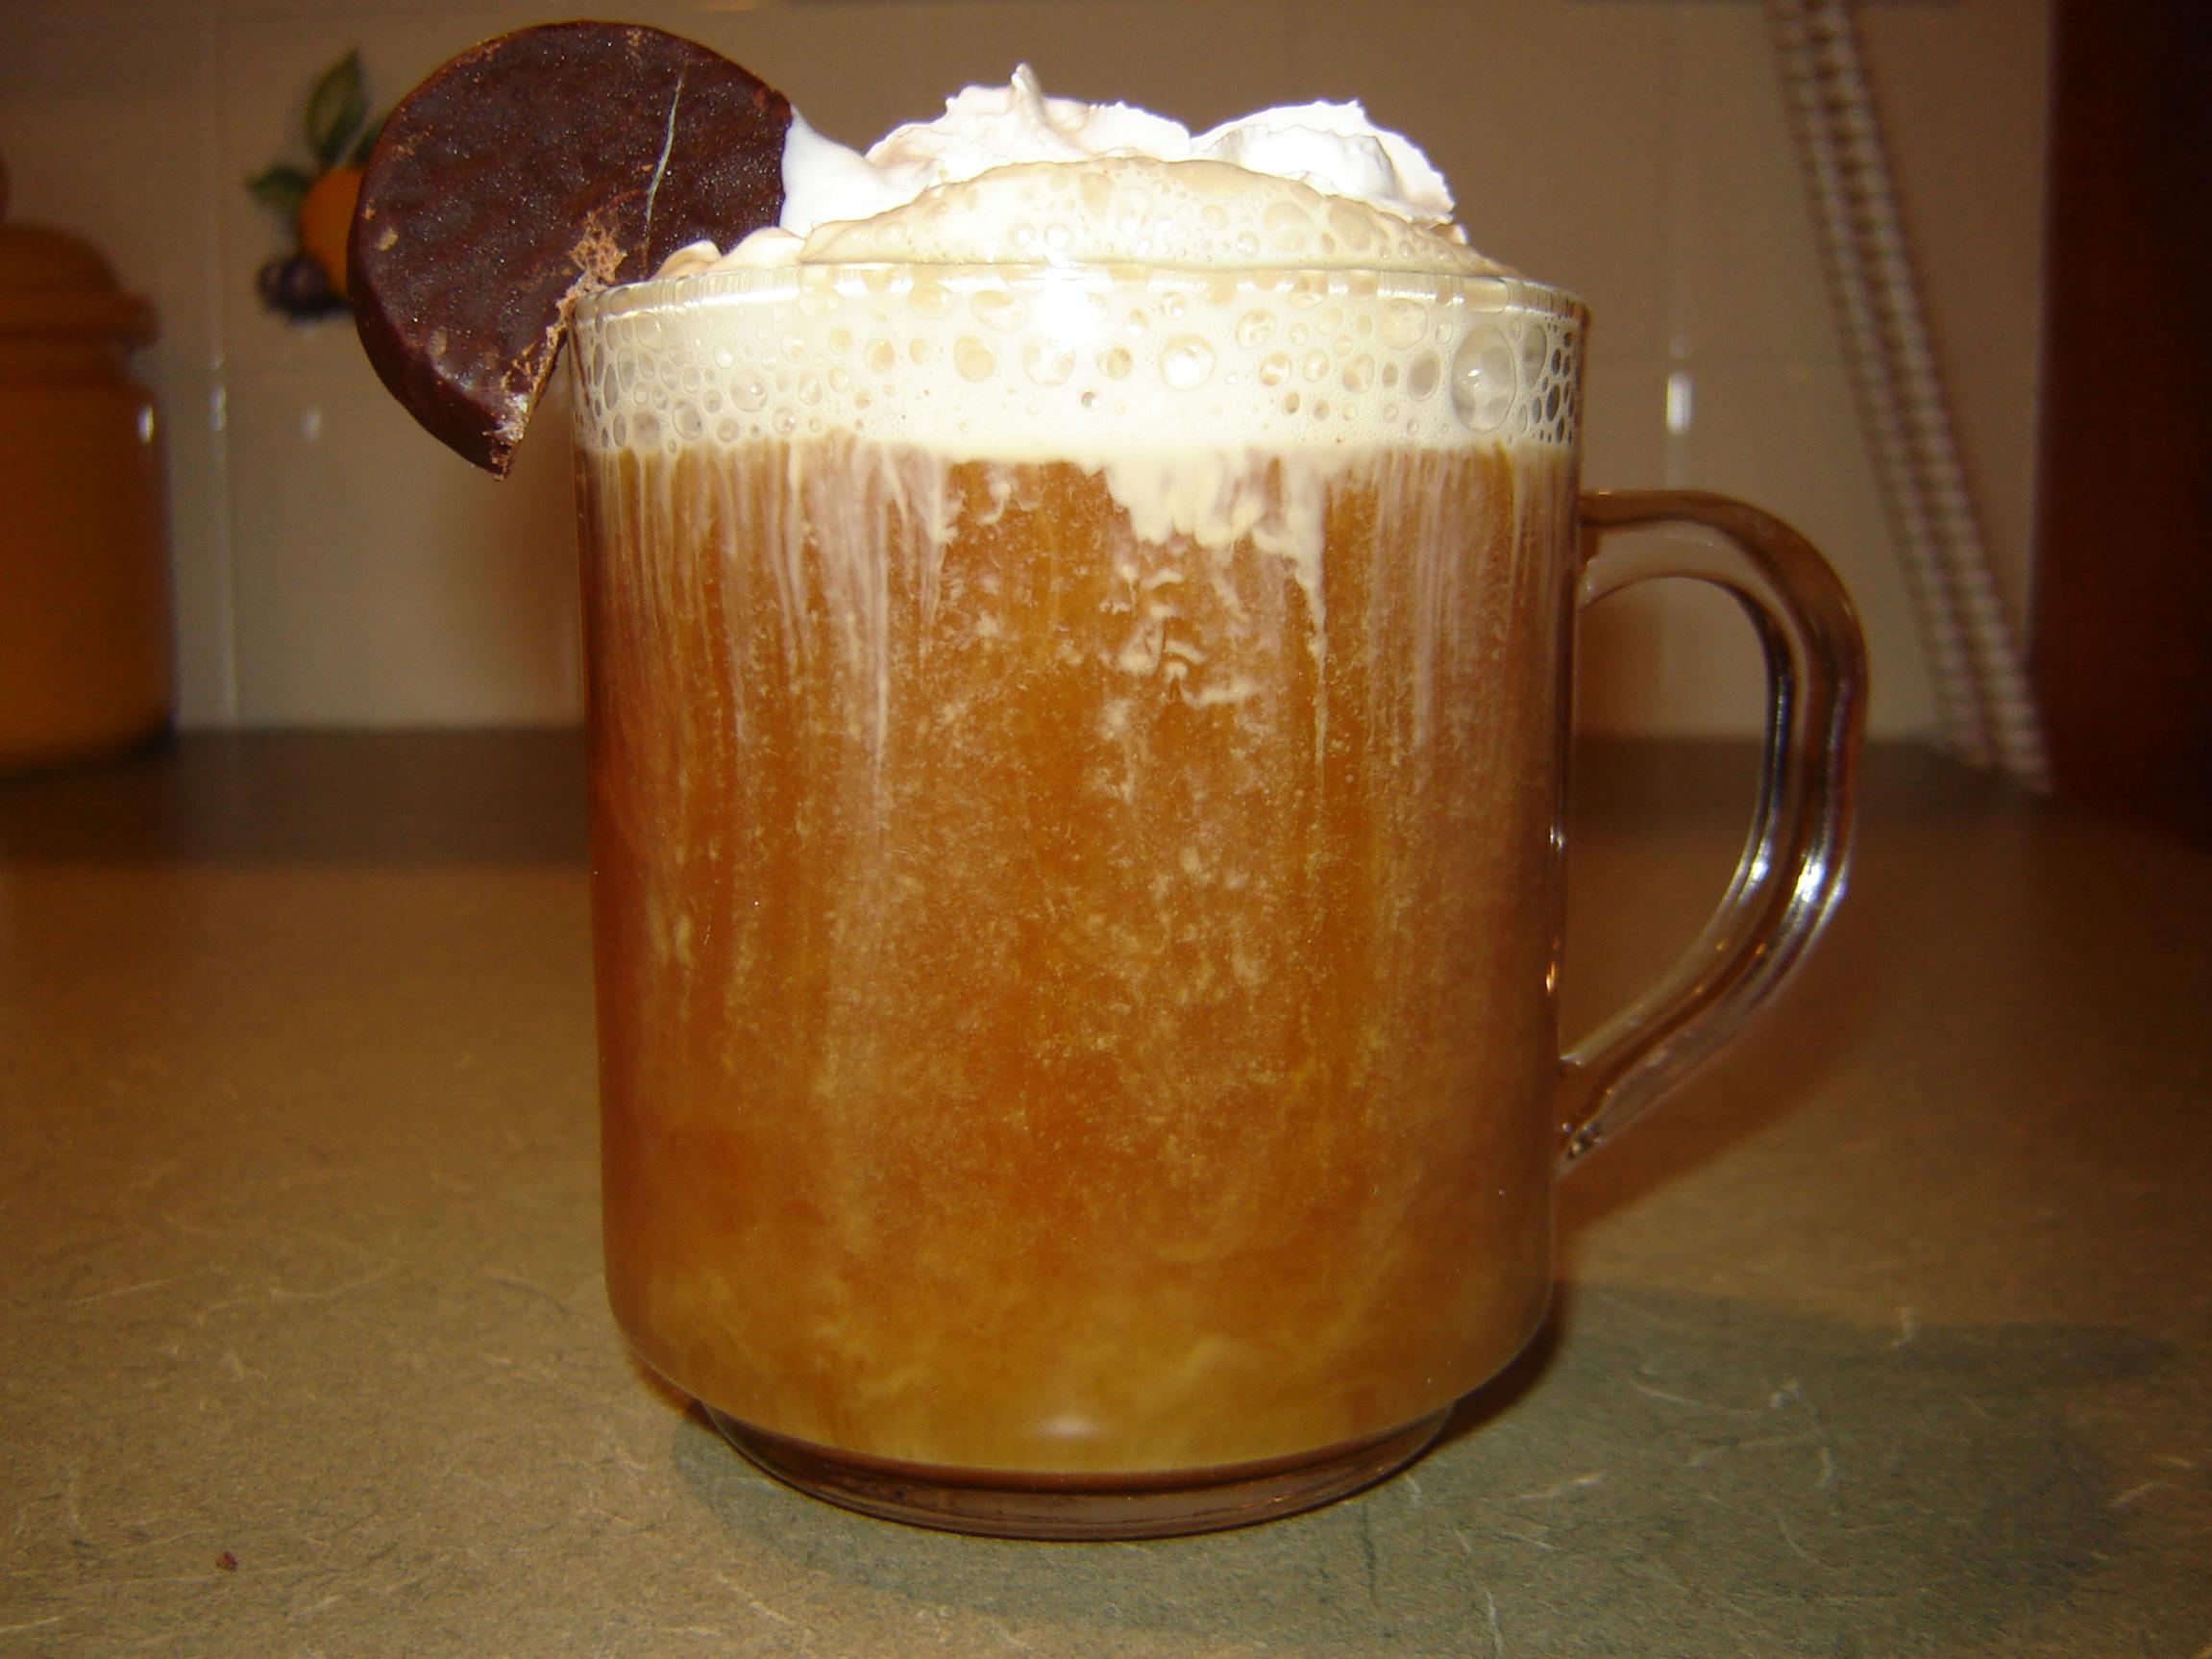  Wake up your taste buds with this delightful Irish Kiss Coffee.